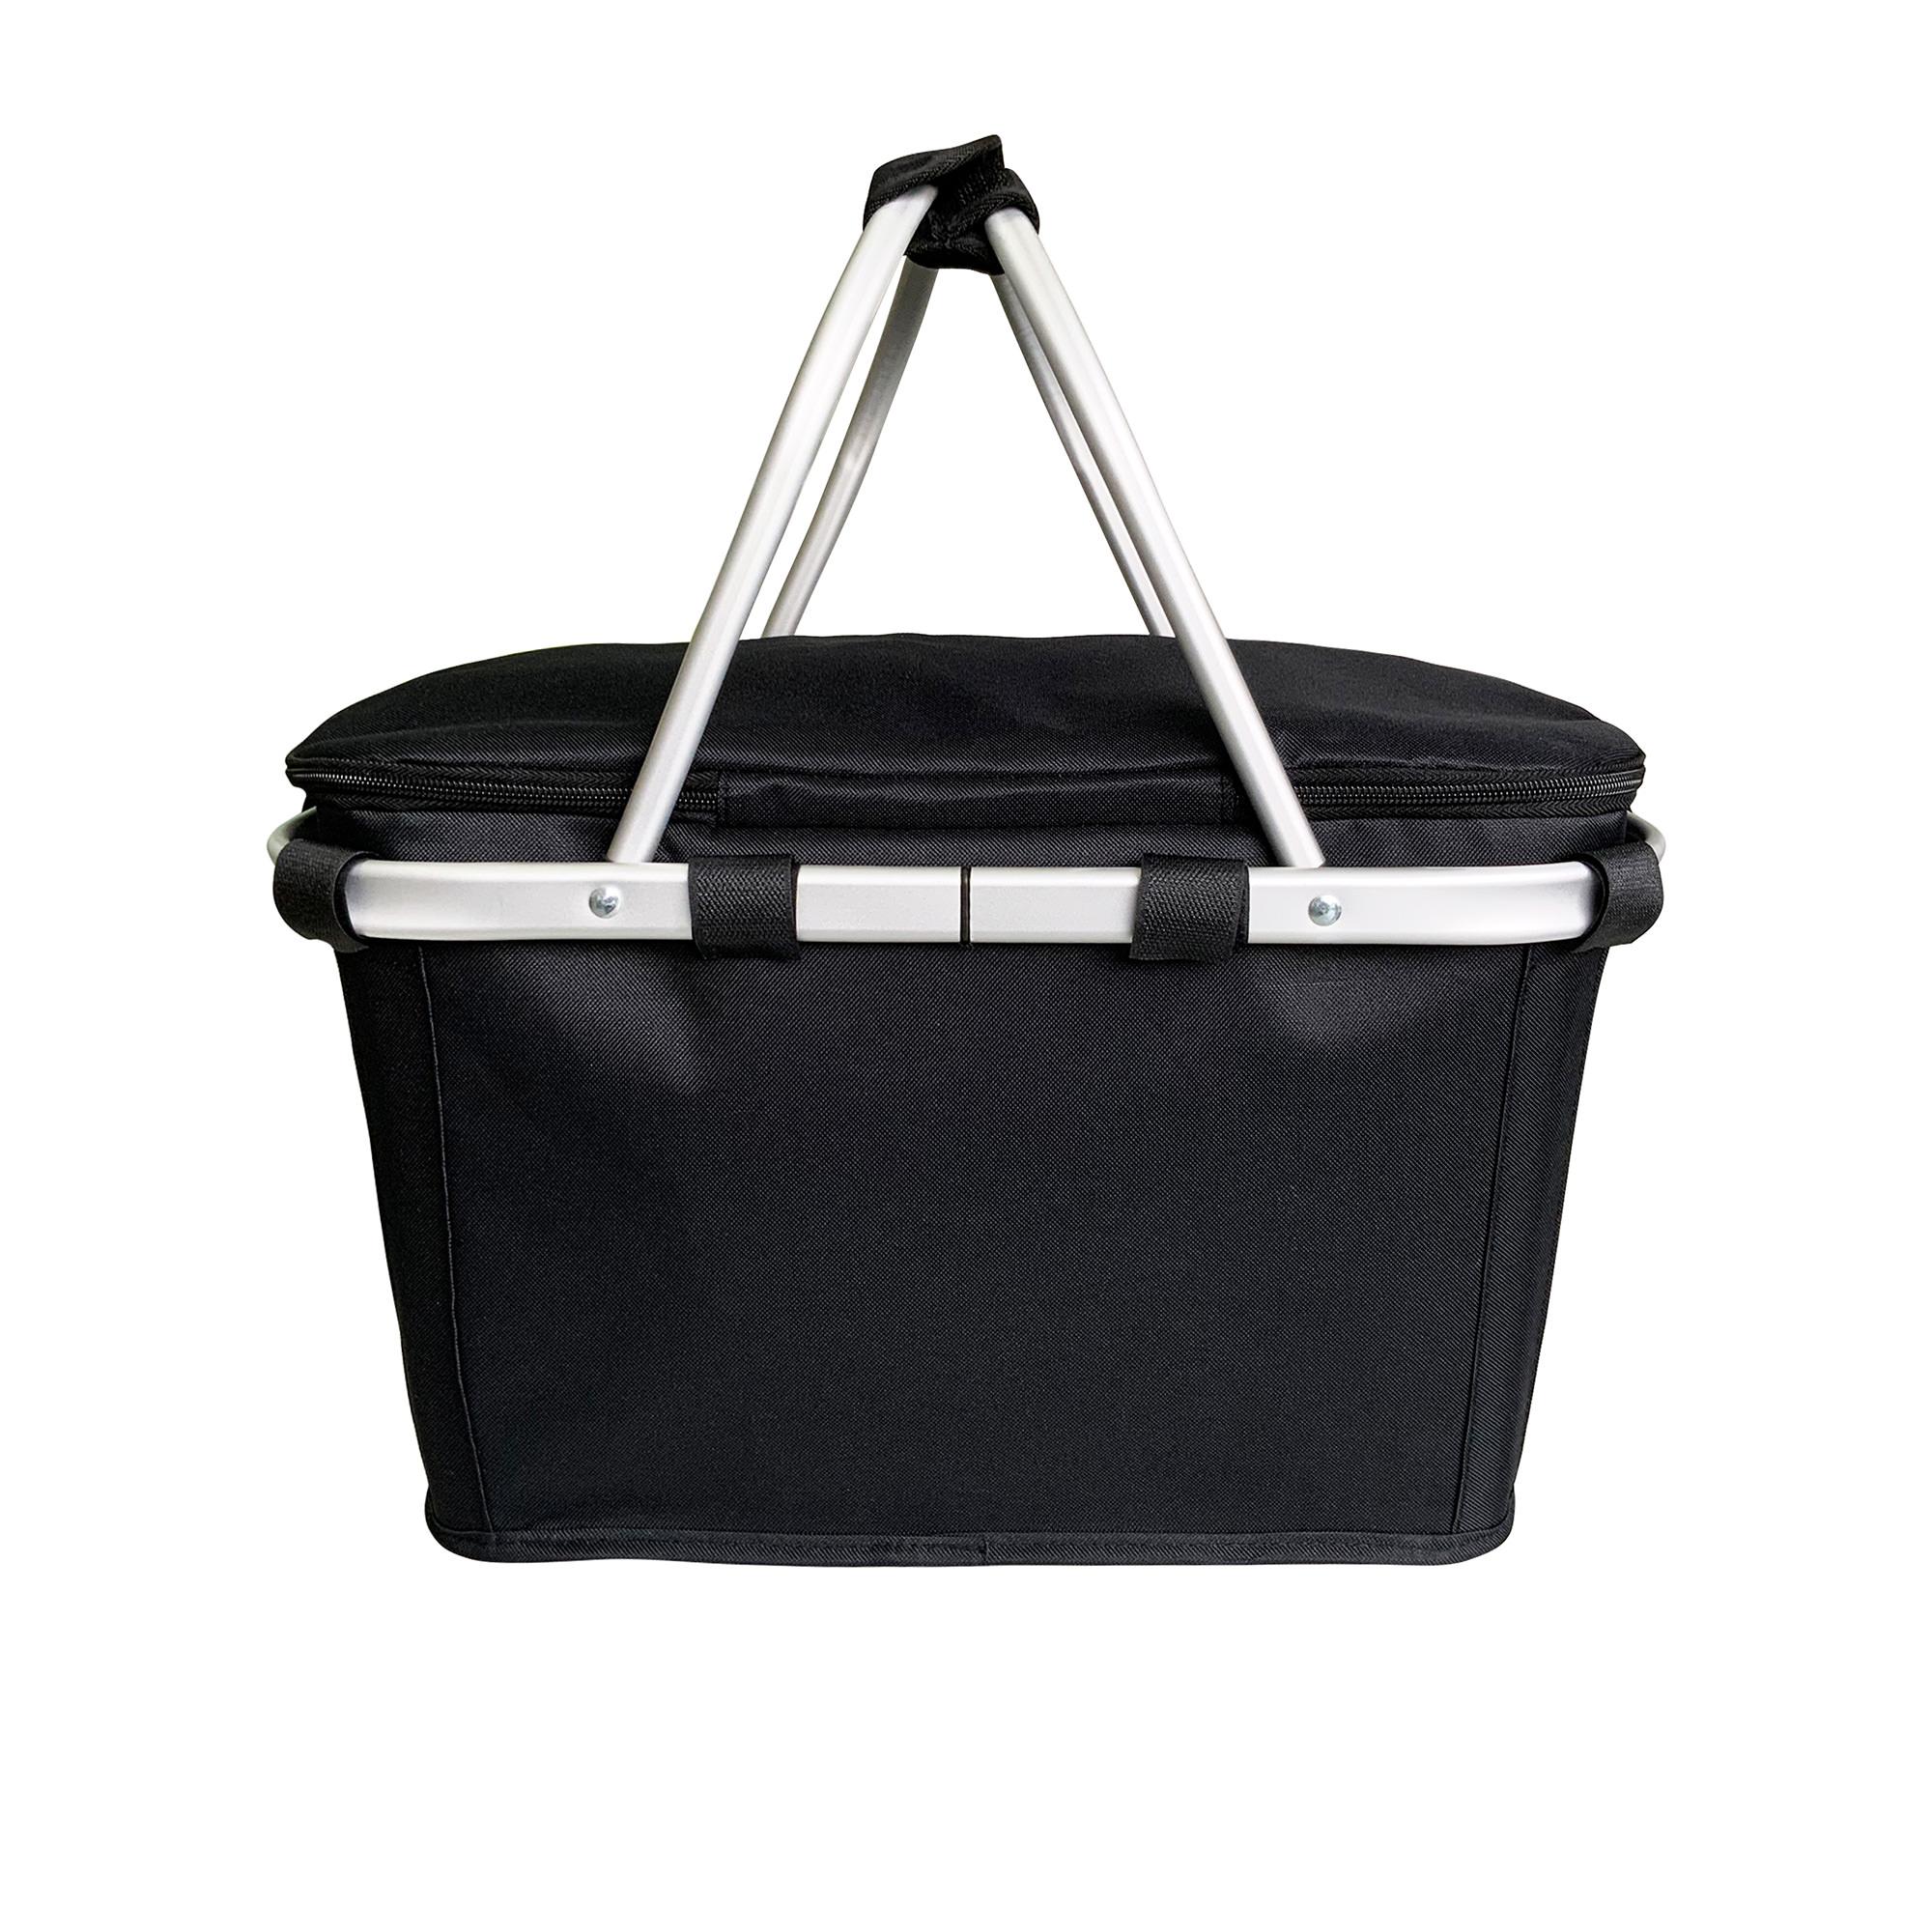 Sachi Insulated Carry Basket with Lid Black Image 3